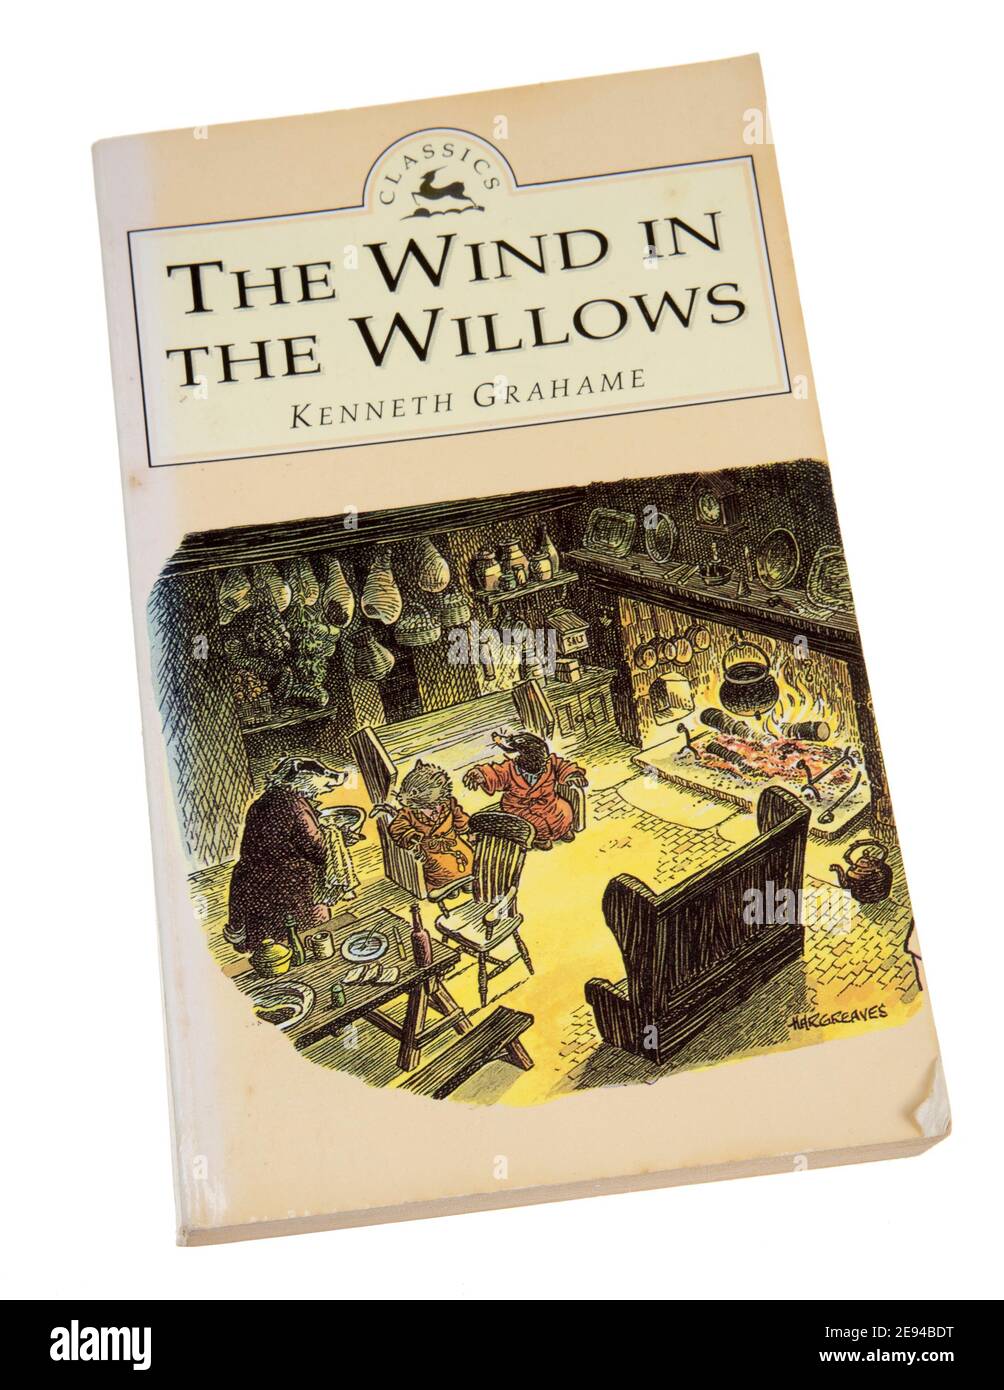 The Wind in the Willows by Kenneth Graham first published in 1908 Stock Photo